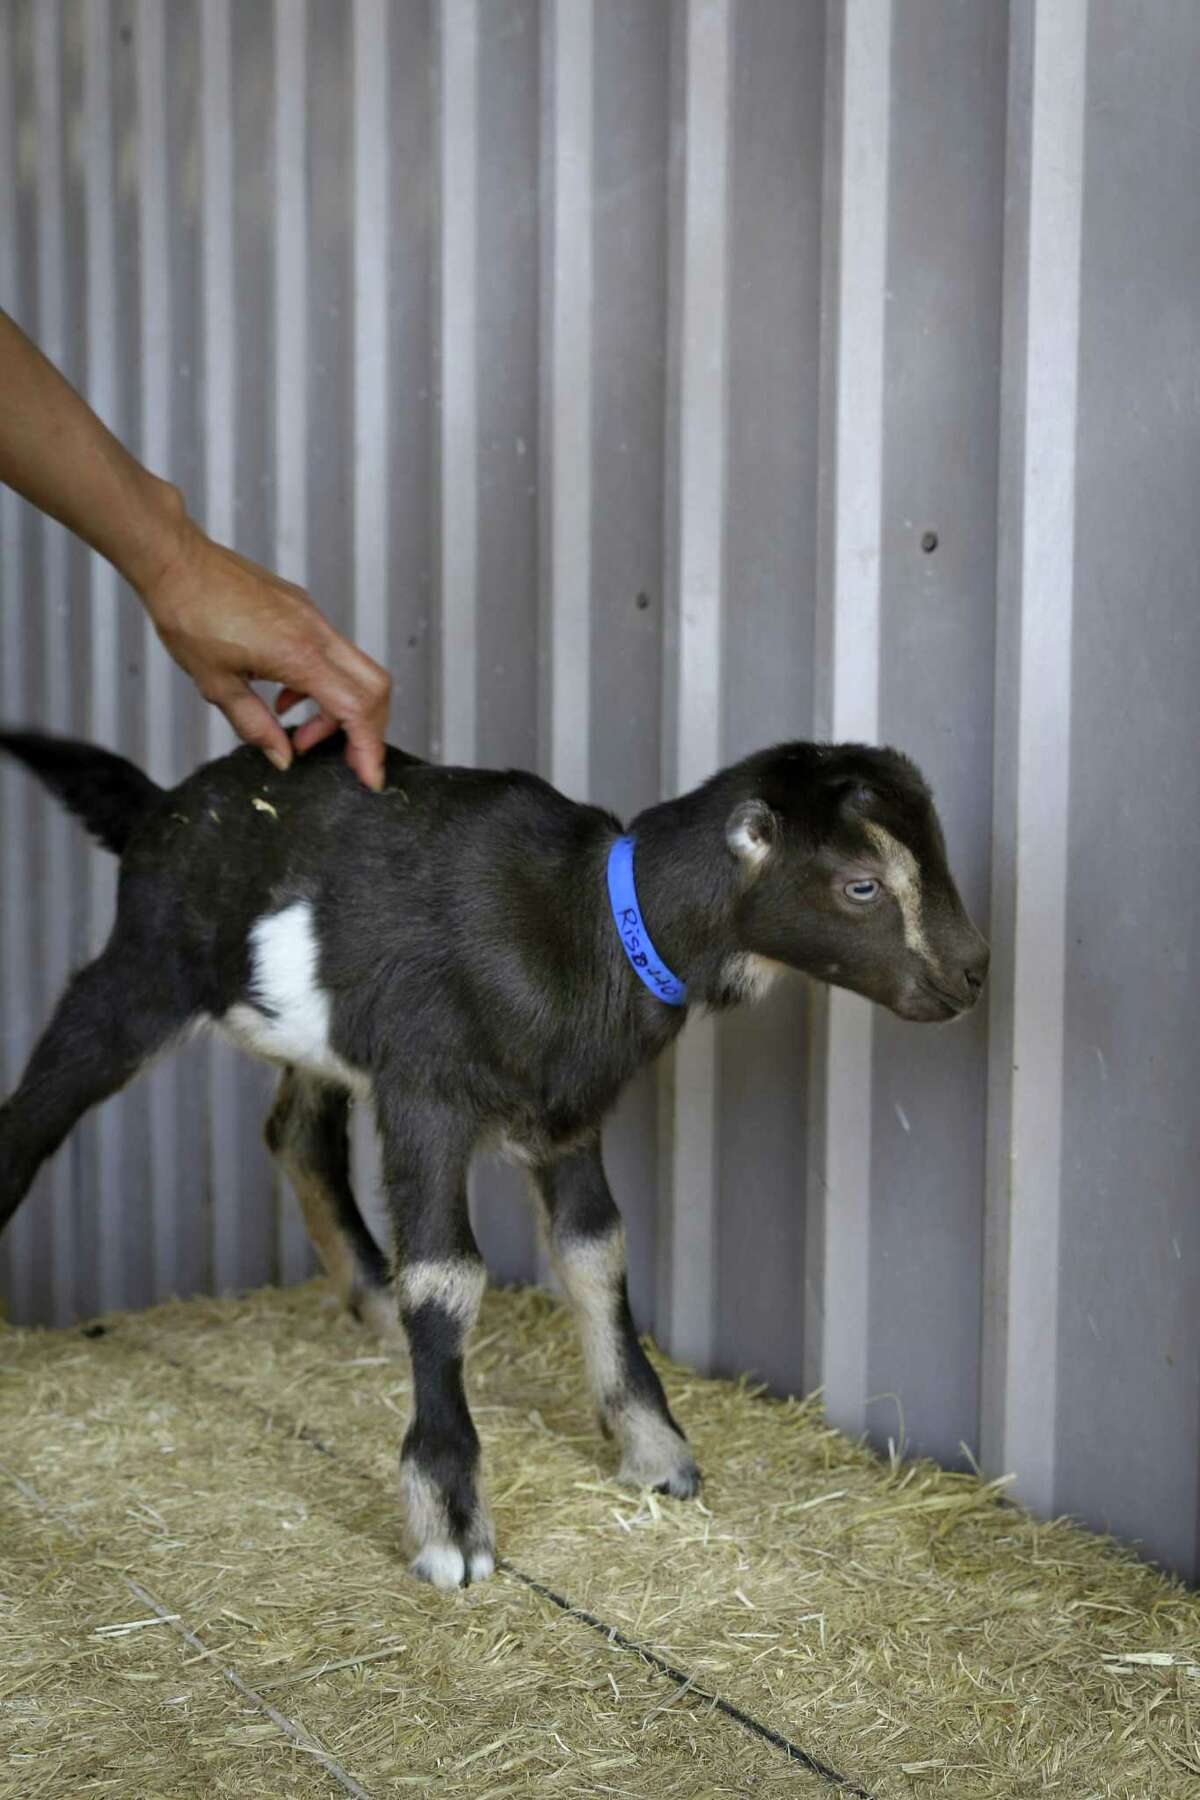 A baby goat at Redwood Hill Farm.